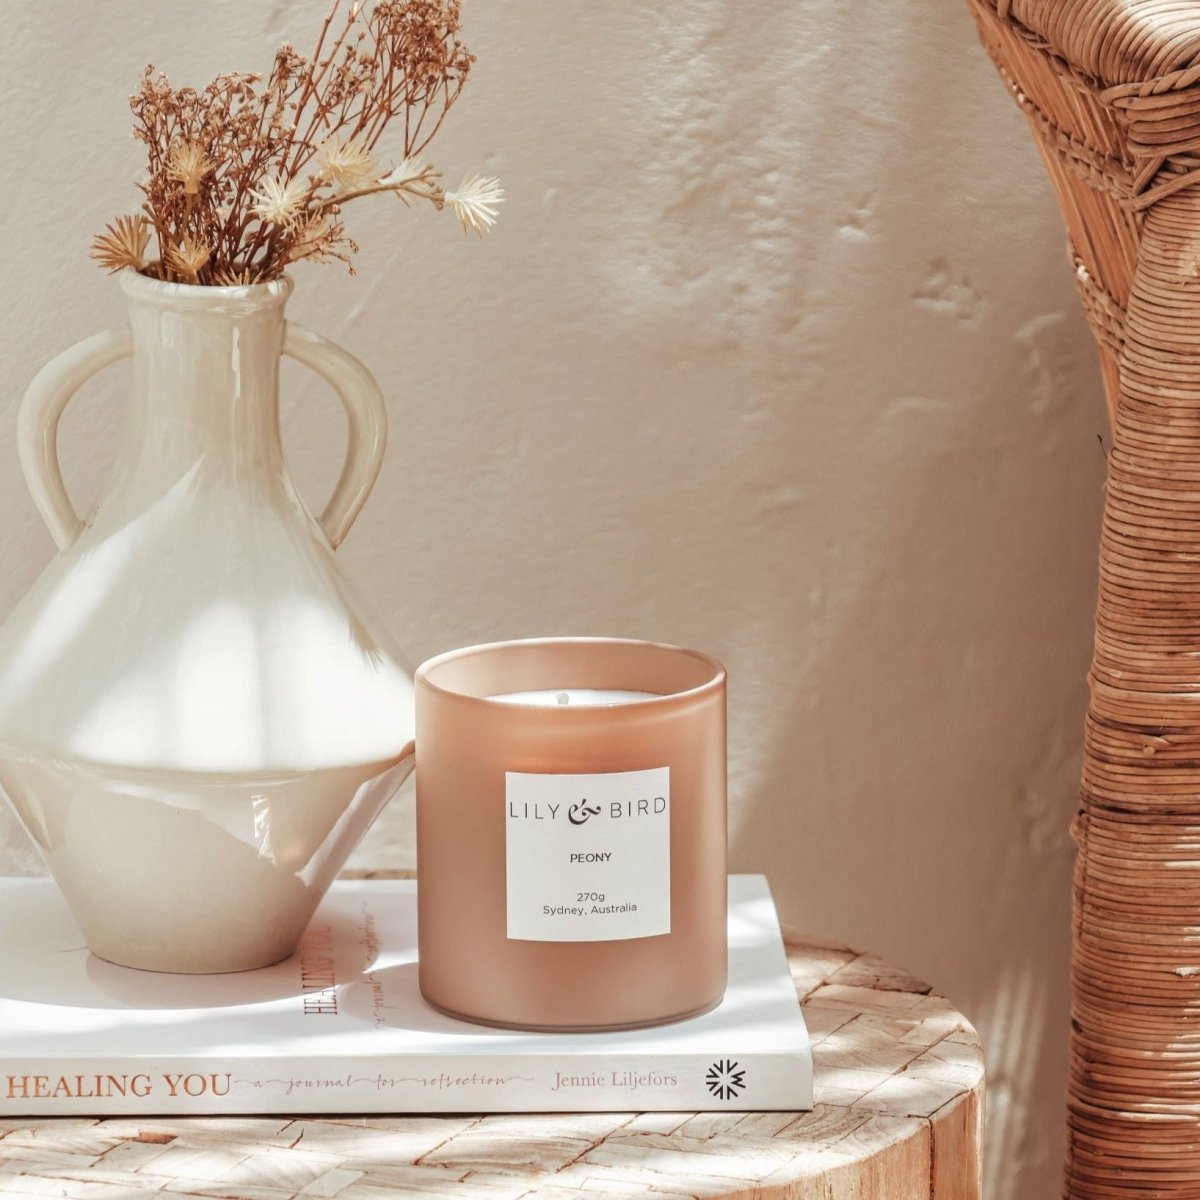 Limited Edition Candles - 270g - Lily and Bird